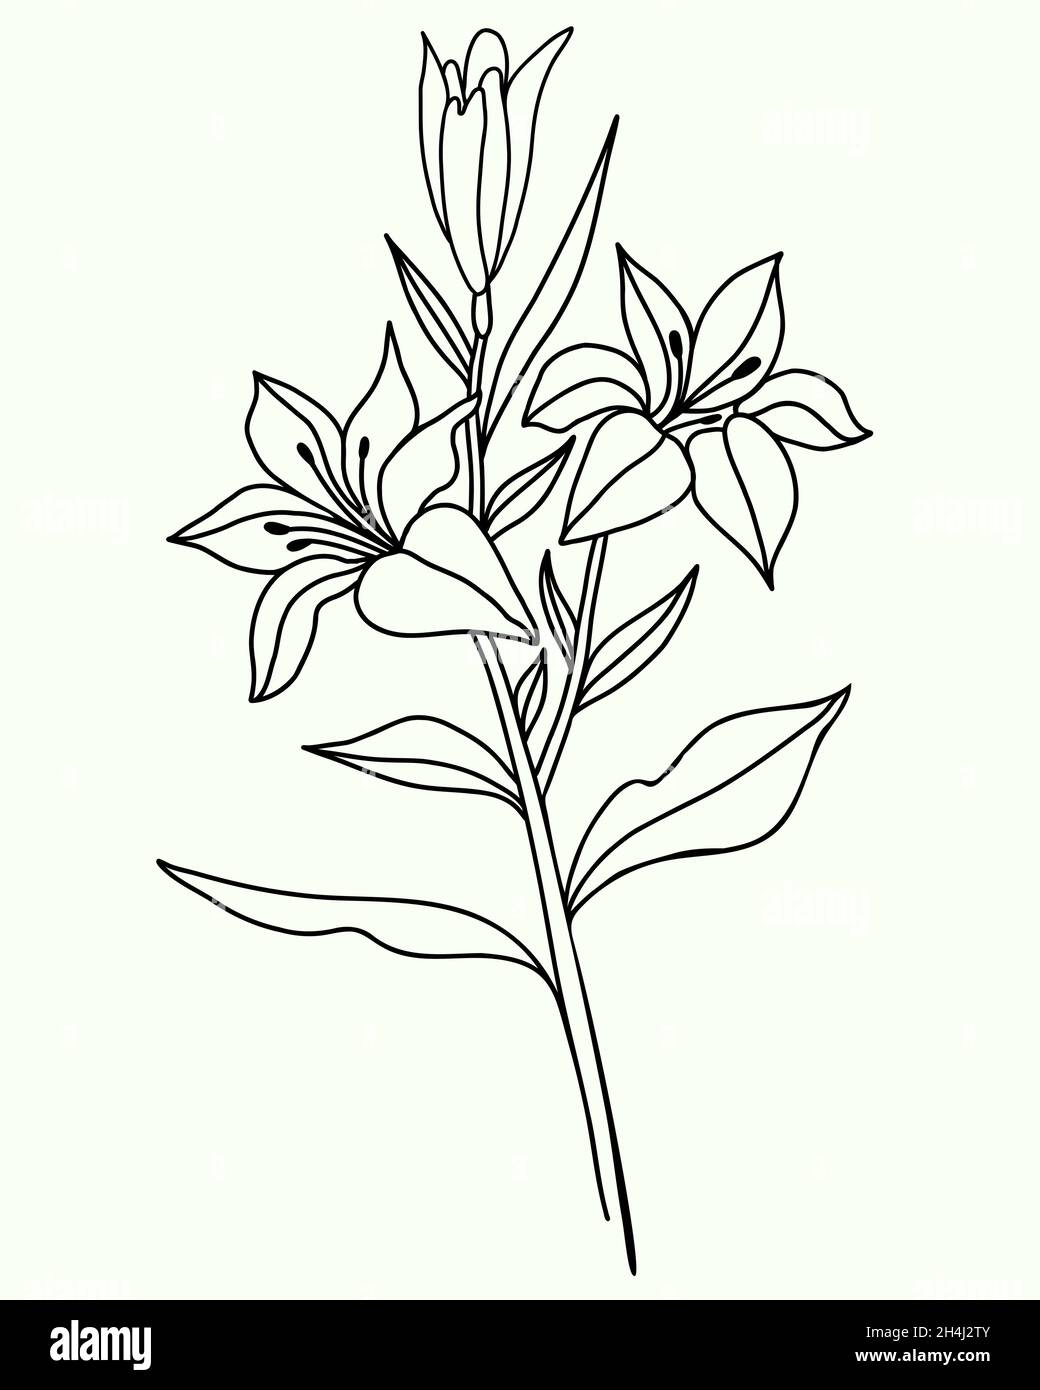 lily flower. Black outline of Branch with flowers and buds. Vector illustration. isolated on white background. Ornamental plant for design, decor, dec Stock Vector